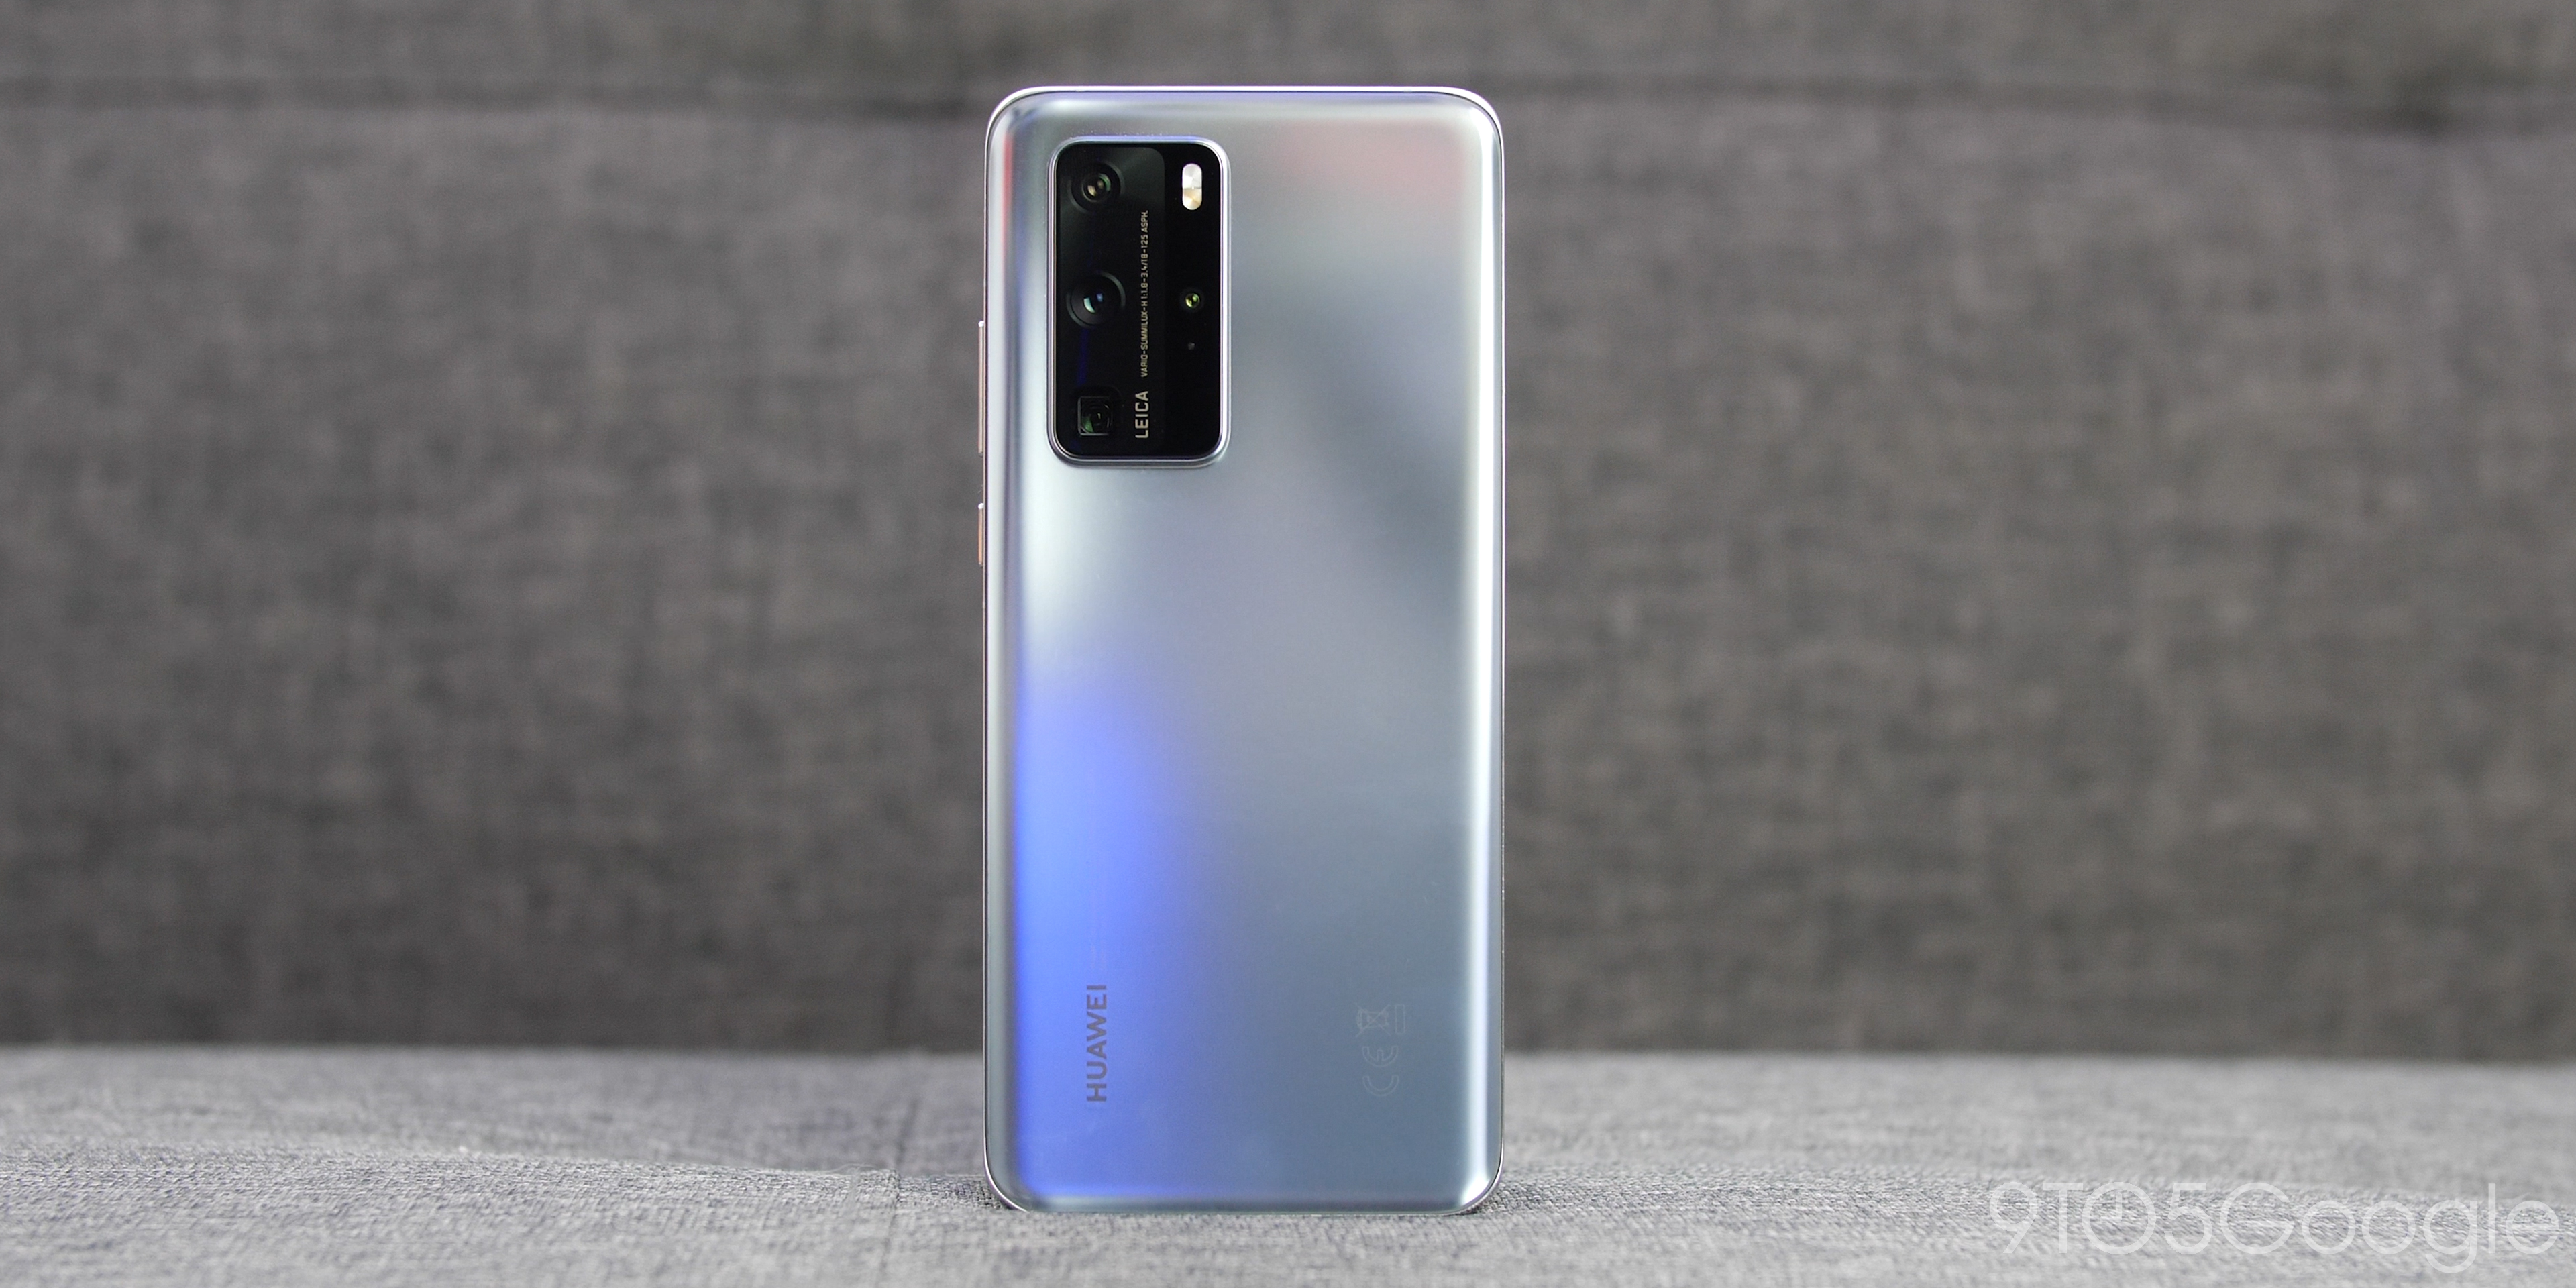 Huawei P40 Pro review: Exceptional camera [Video] - 9to5Google